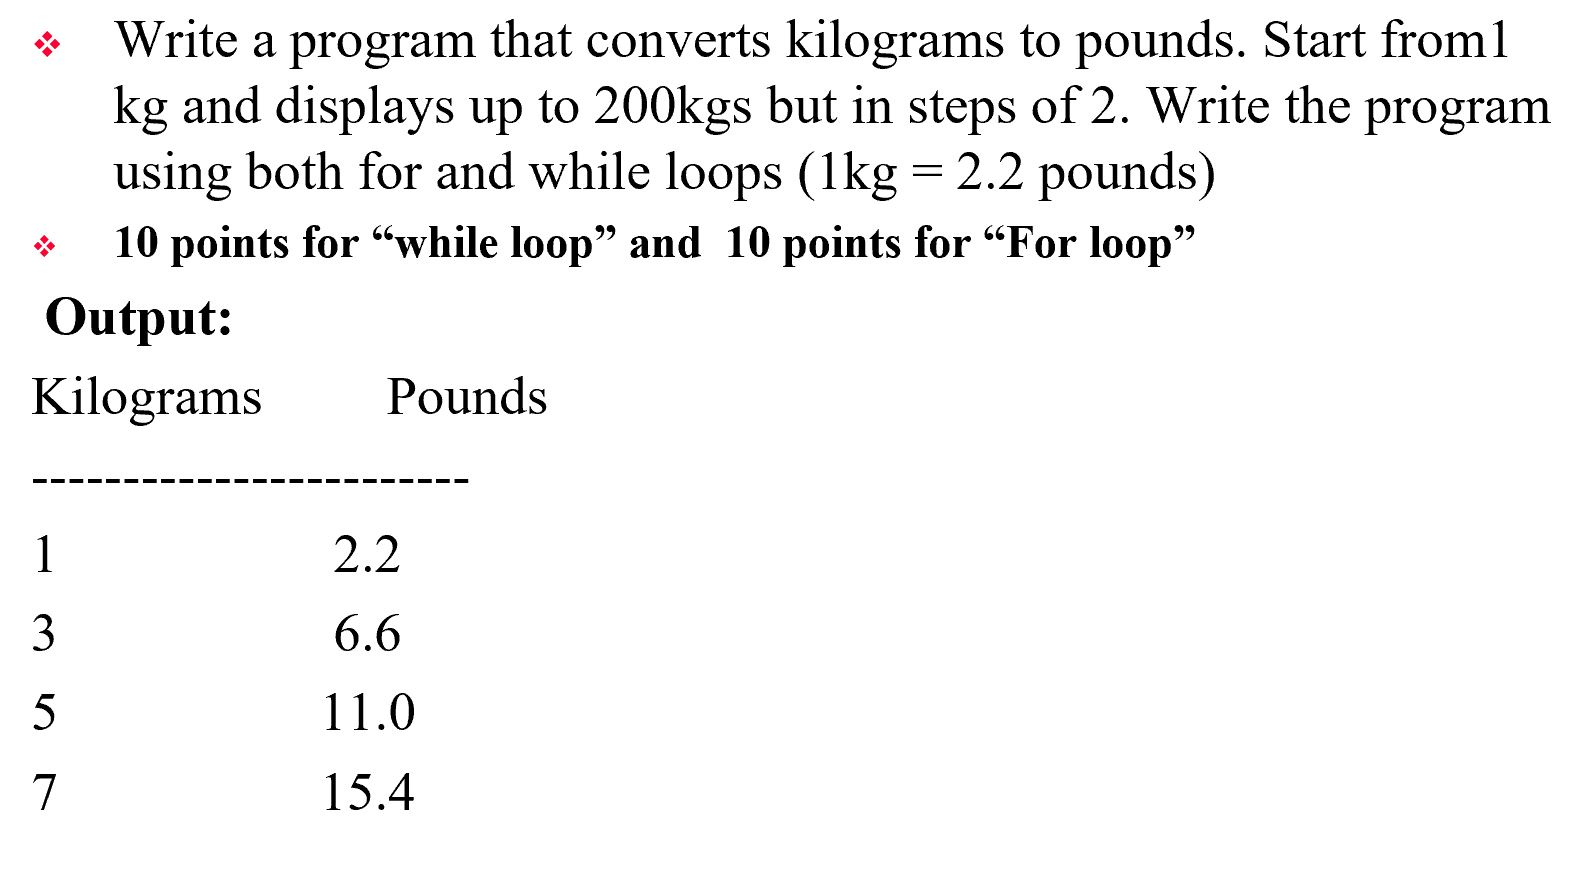 Kilograms to 200 Pounds in Kg converter - How much Convert 200 Kilograms to...